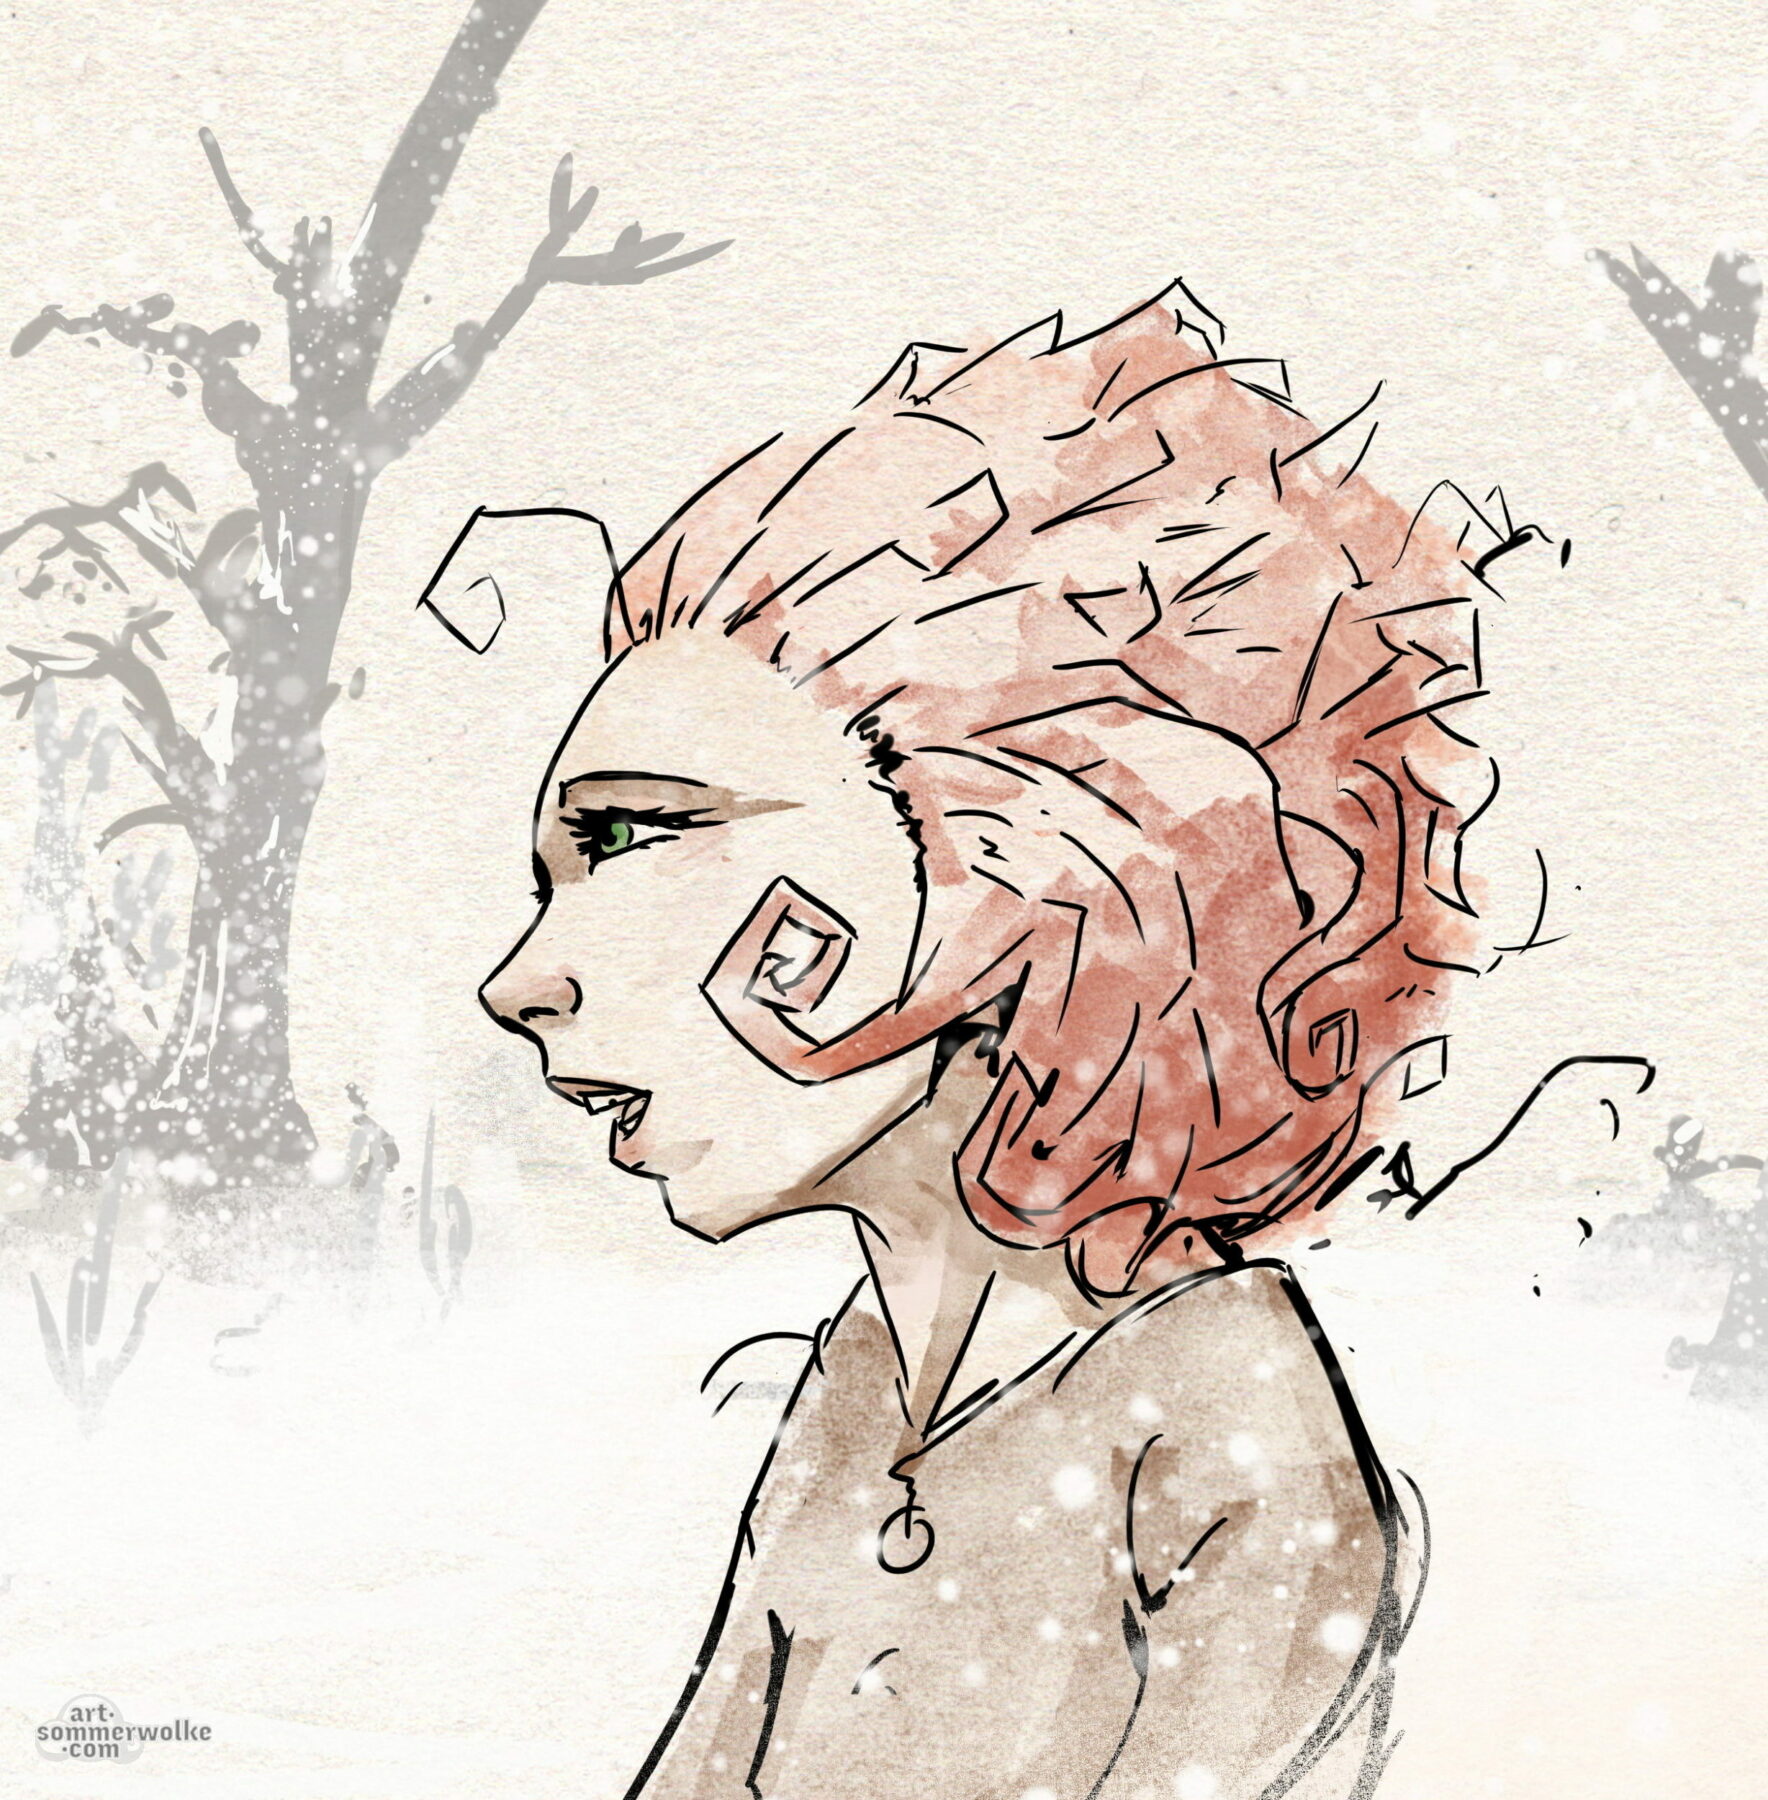 Digital illustration of a young woman with red curly hair in a snowstorm.